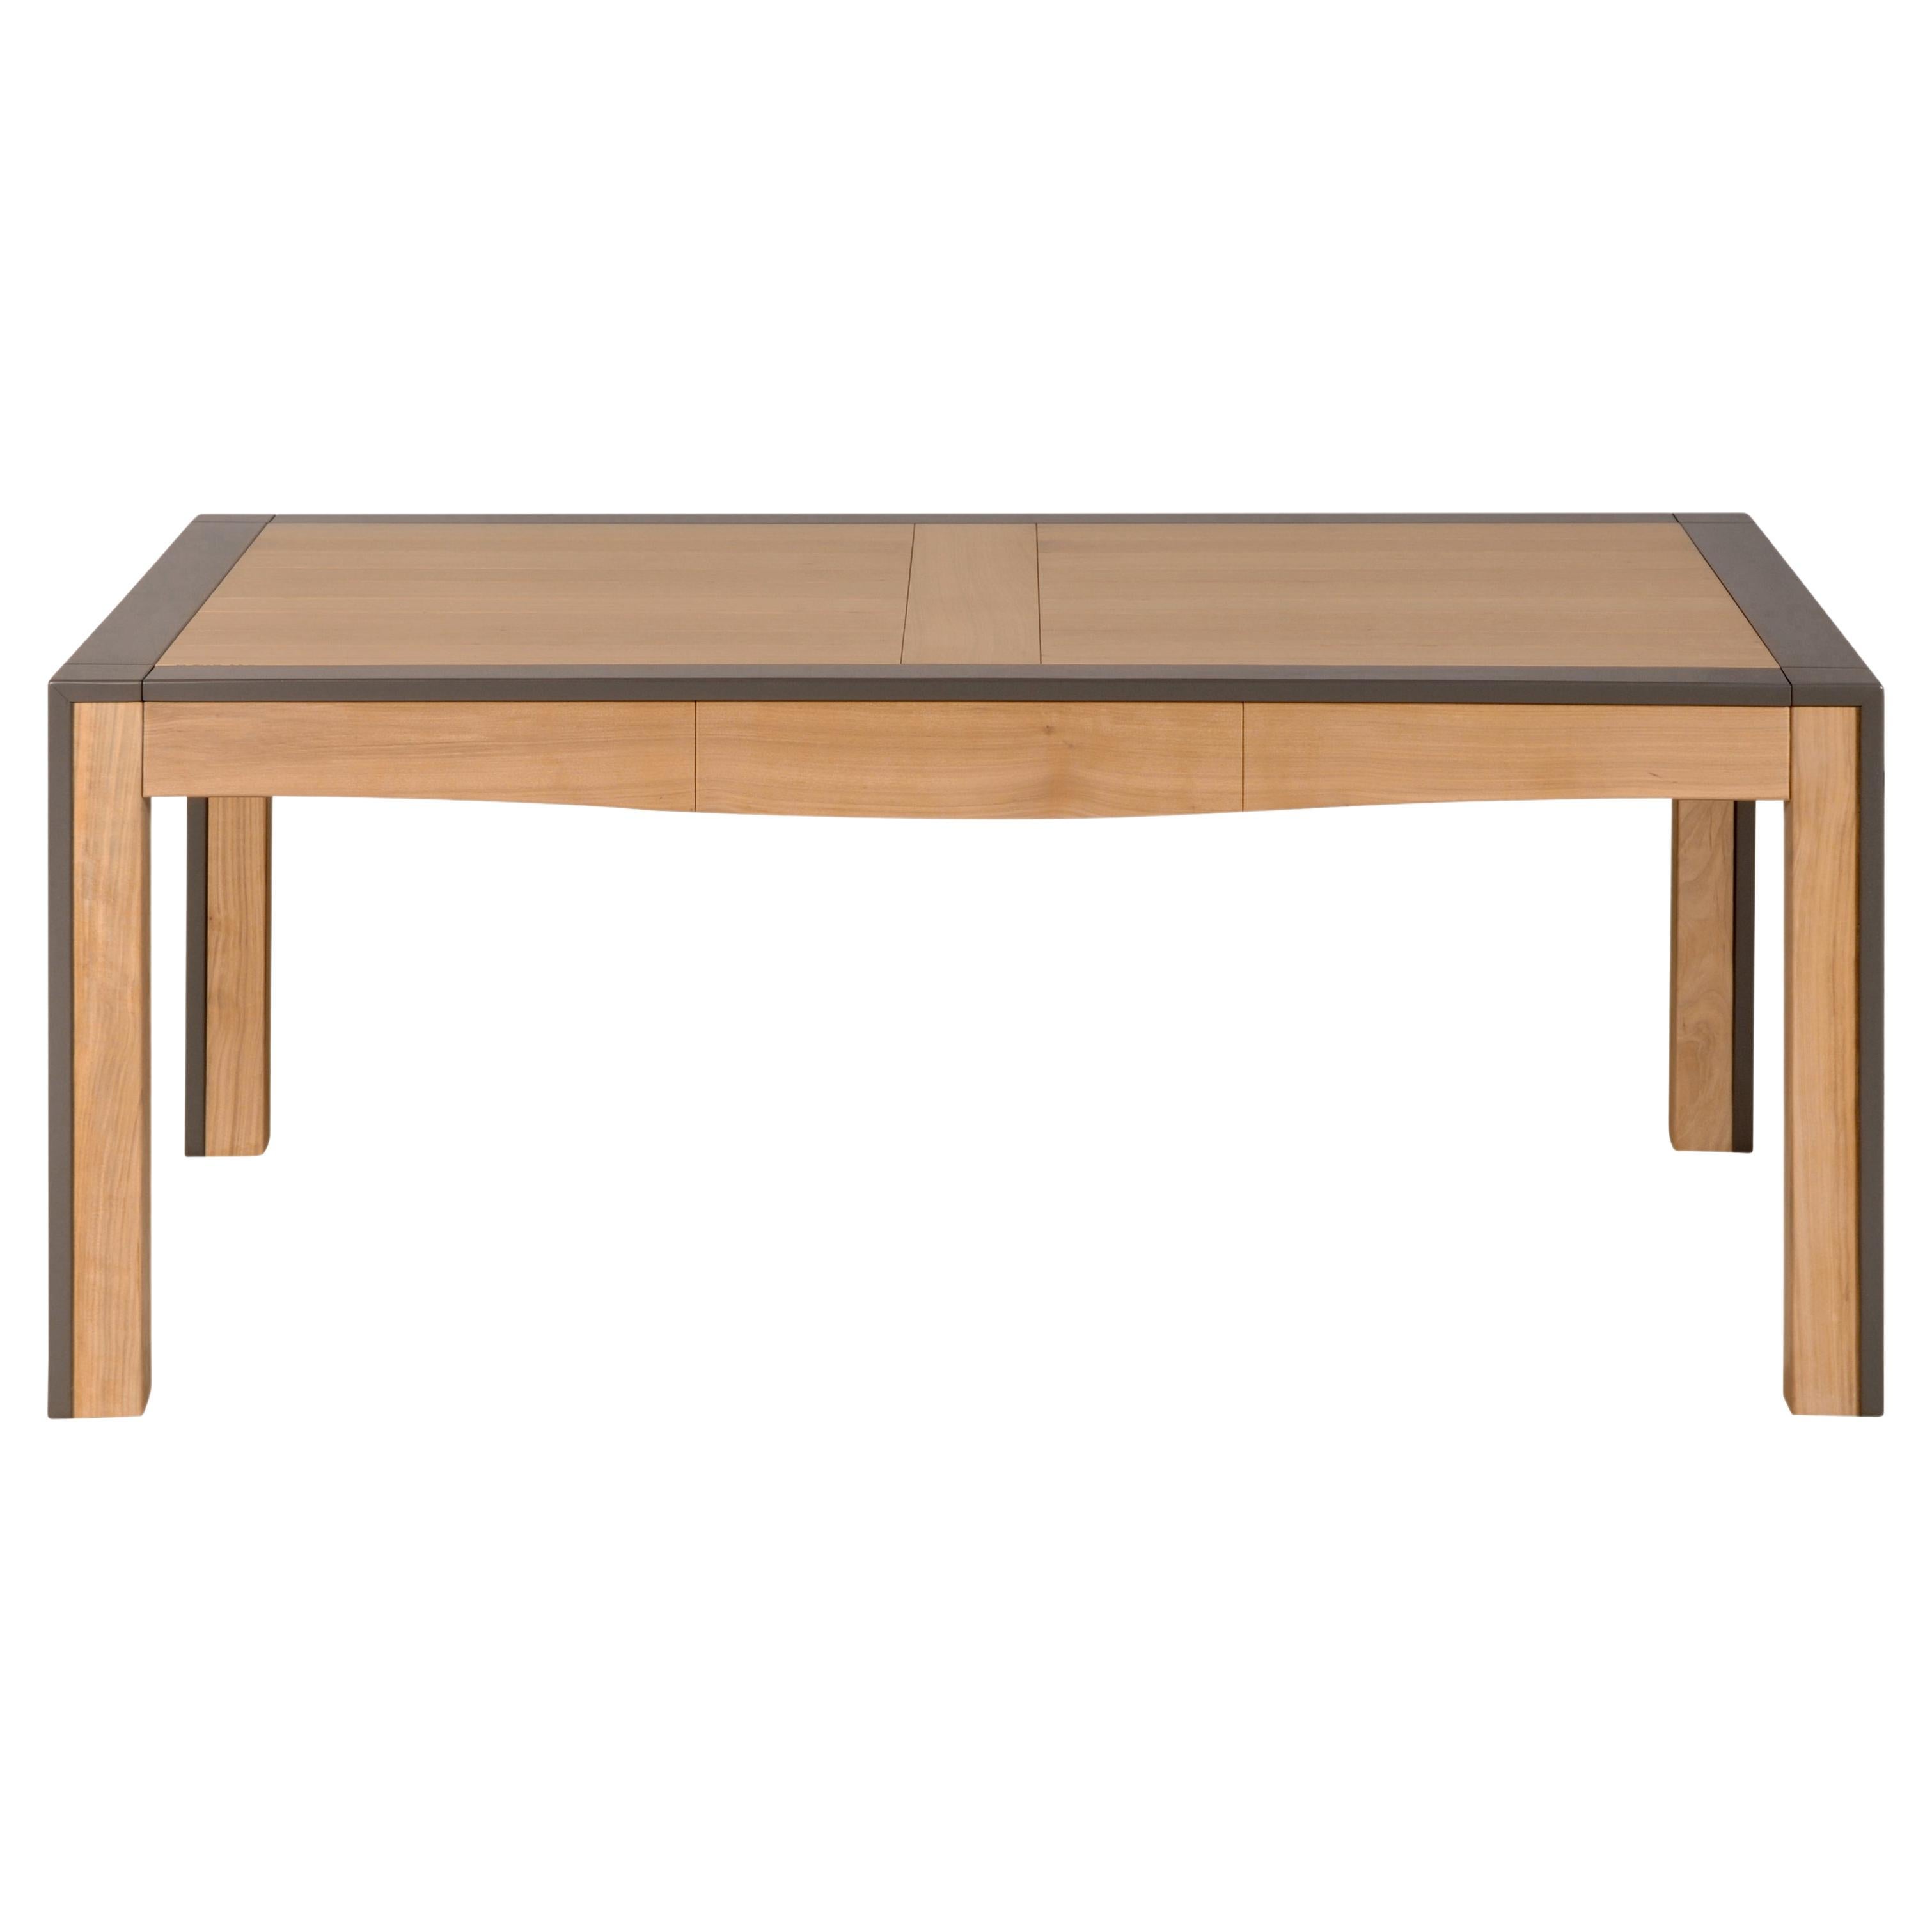 Rectangular Extensible Dining Table with 2 Leaves in French Solid Cherry